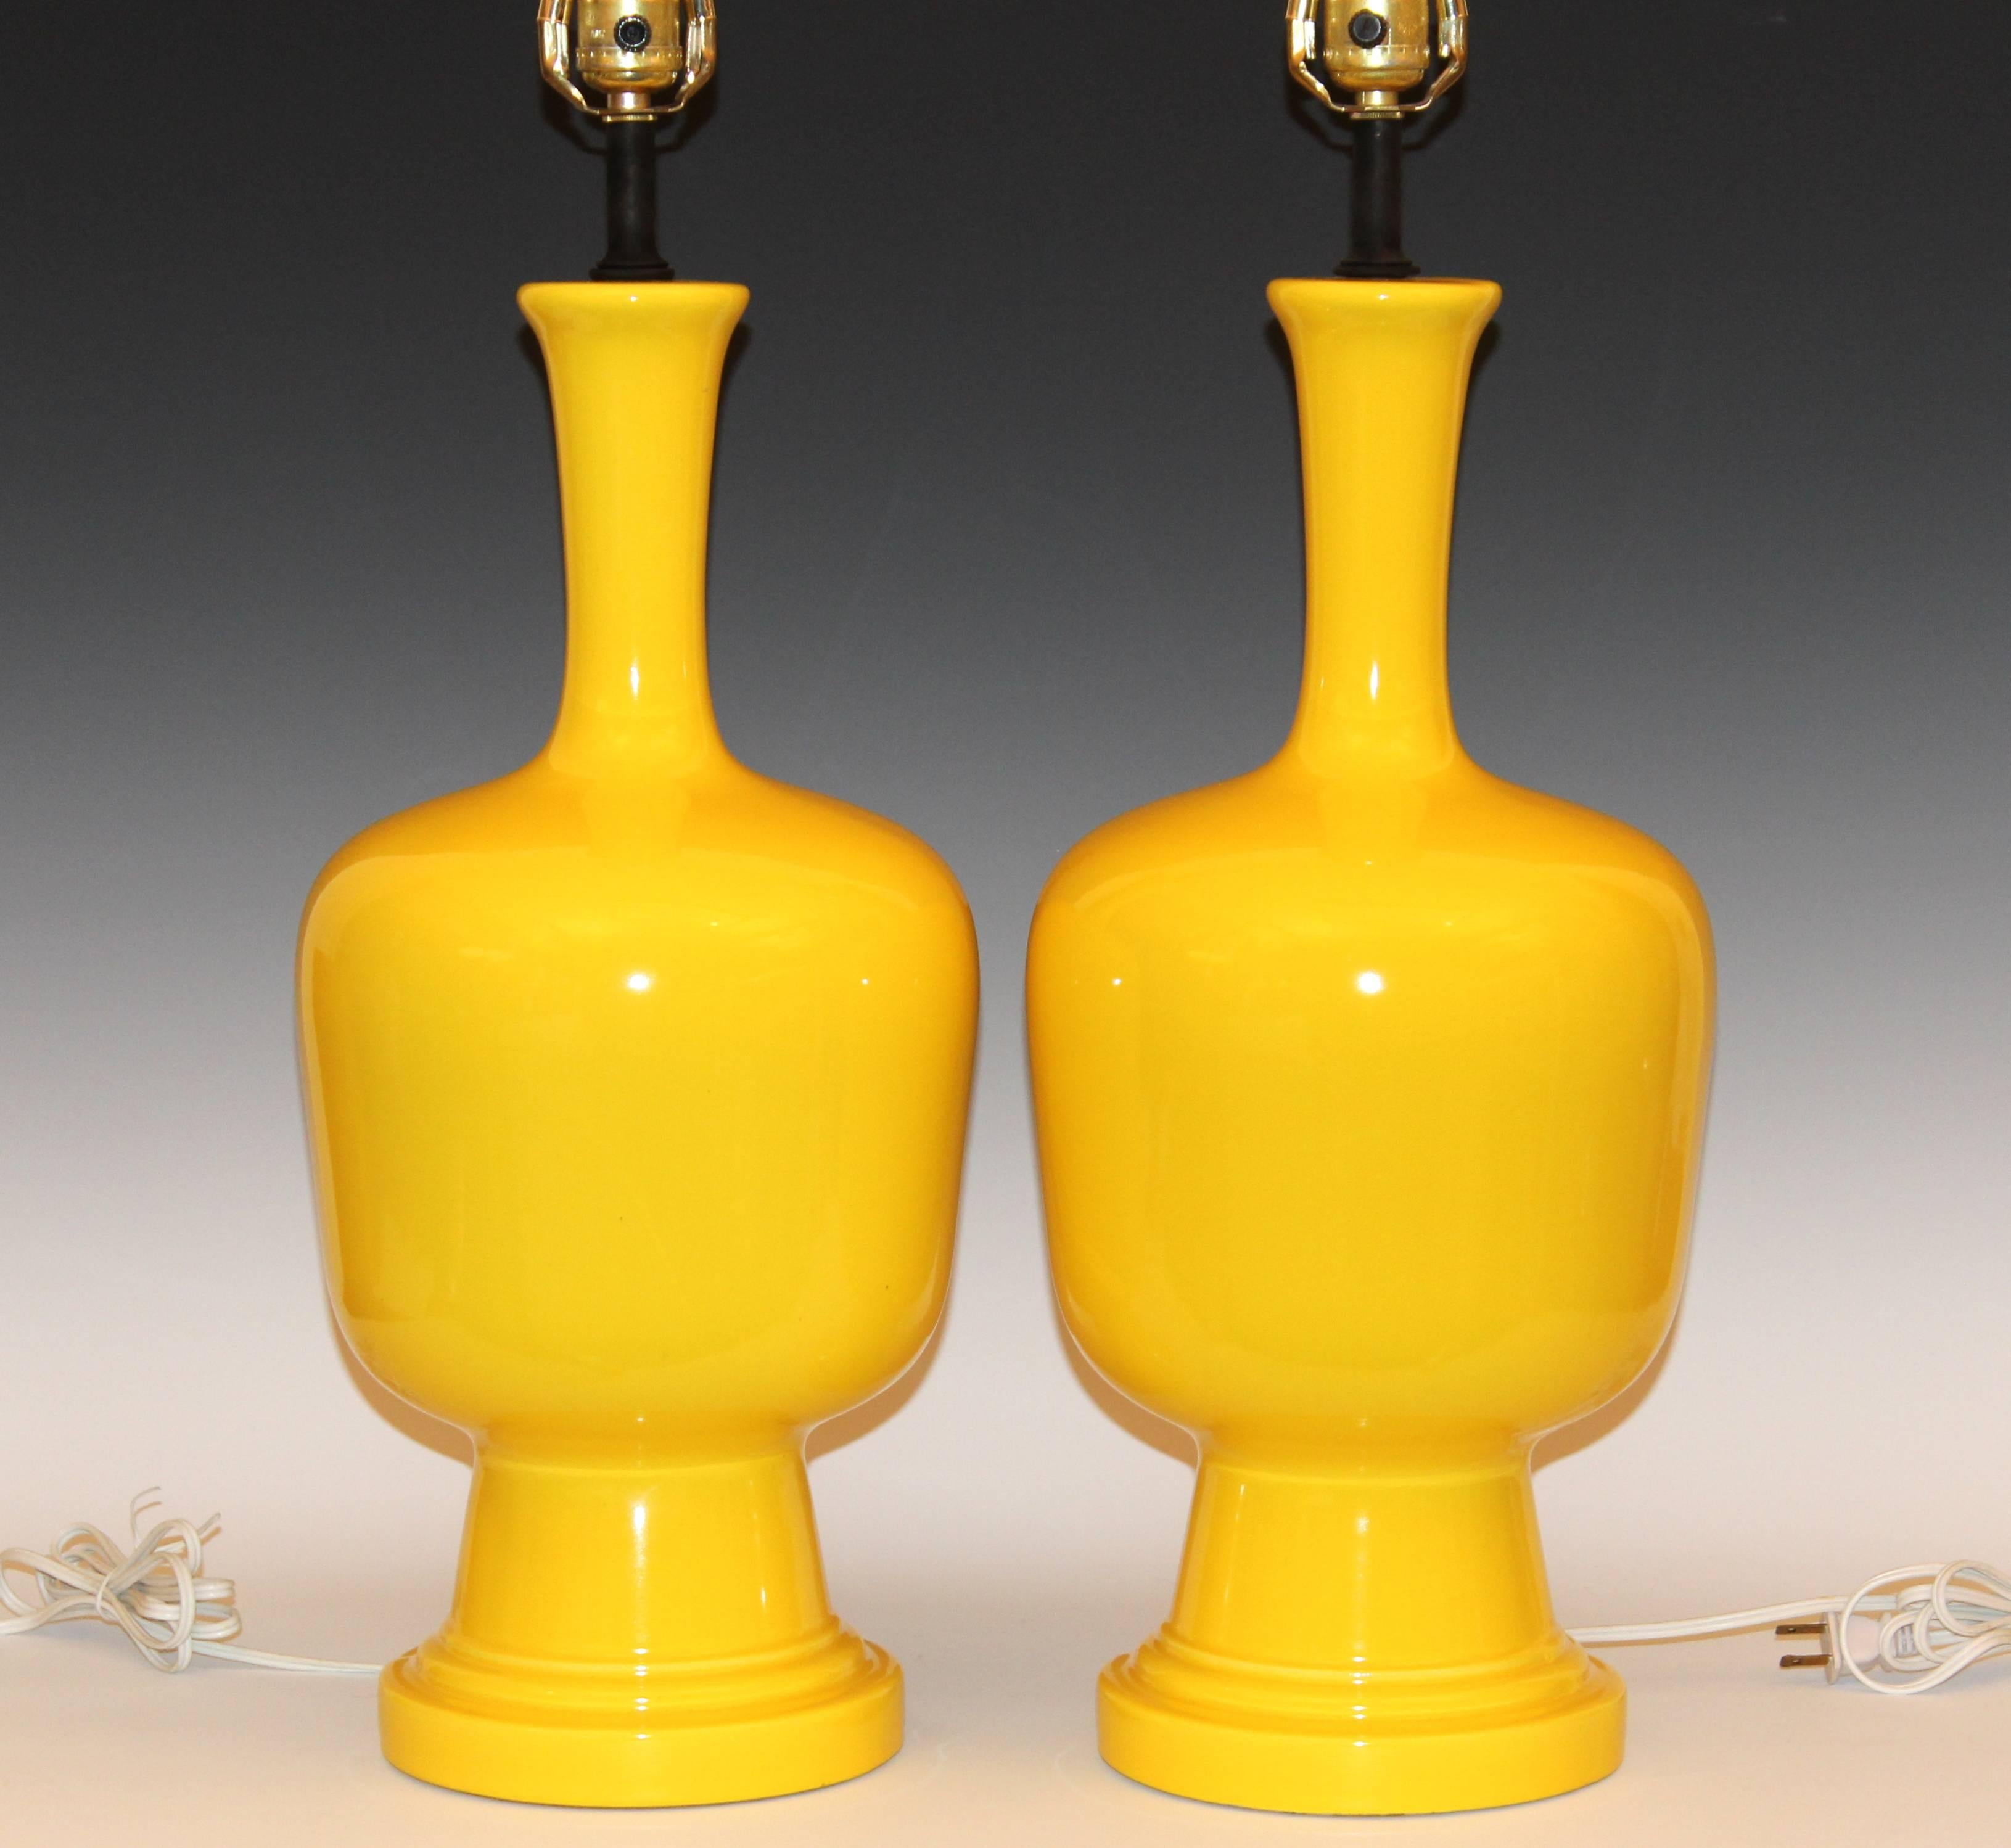 Modern Pair of Vintage Organic Form Atomic Chrome Yellow Pottery Lamps